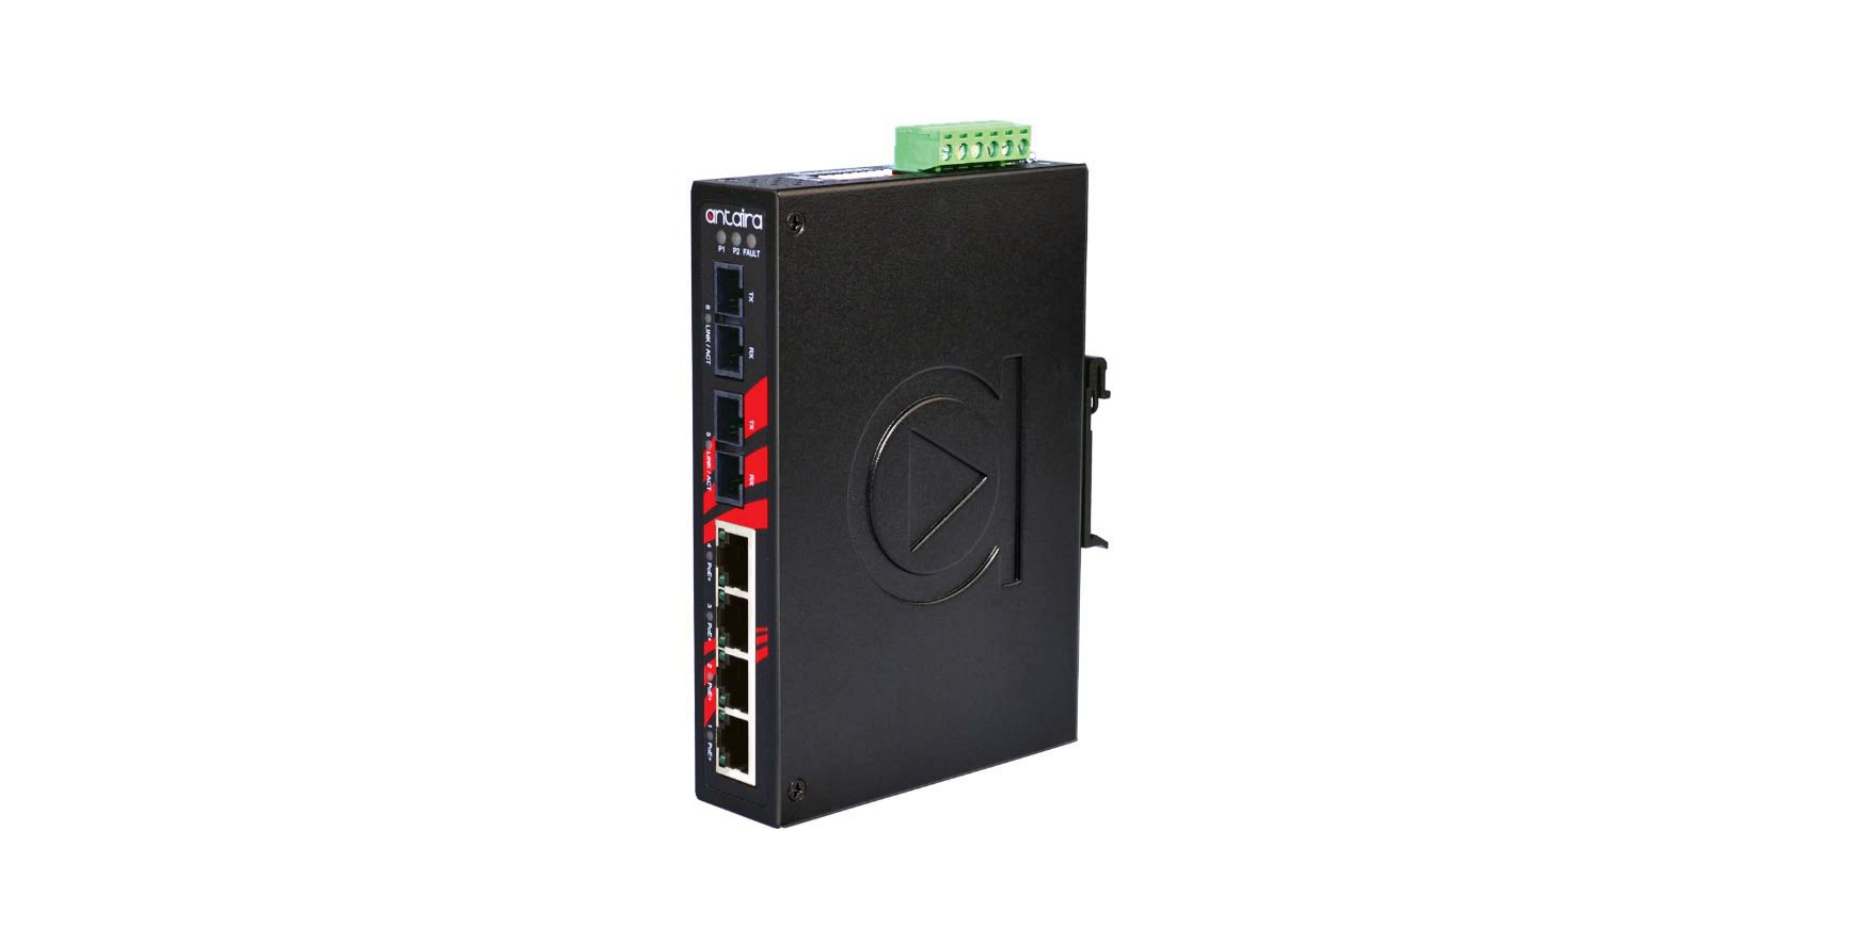 LNP-0602 Industrial Unmanaged PoE Switch